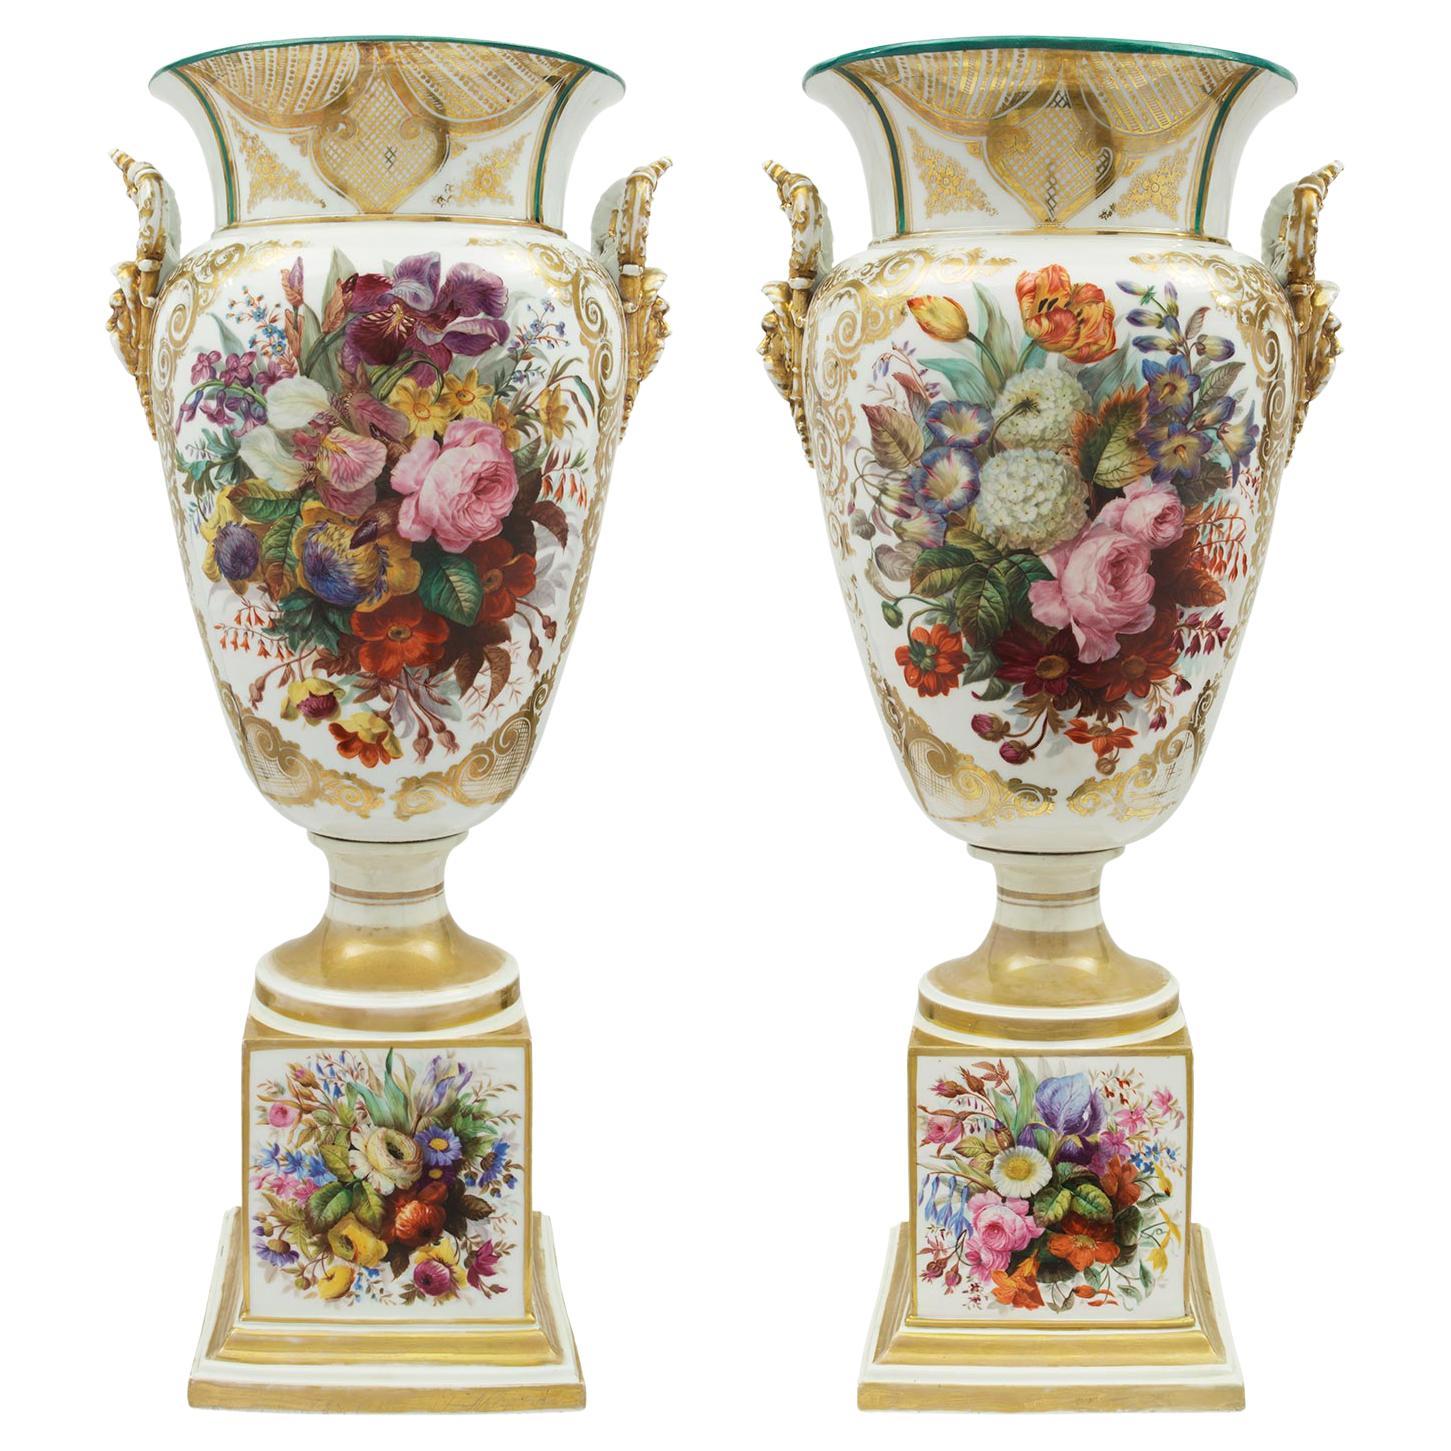 Pair of French Early 19th Century Louis XVI Style Sèvres Porcelain Vases For Sale